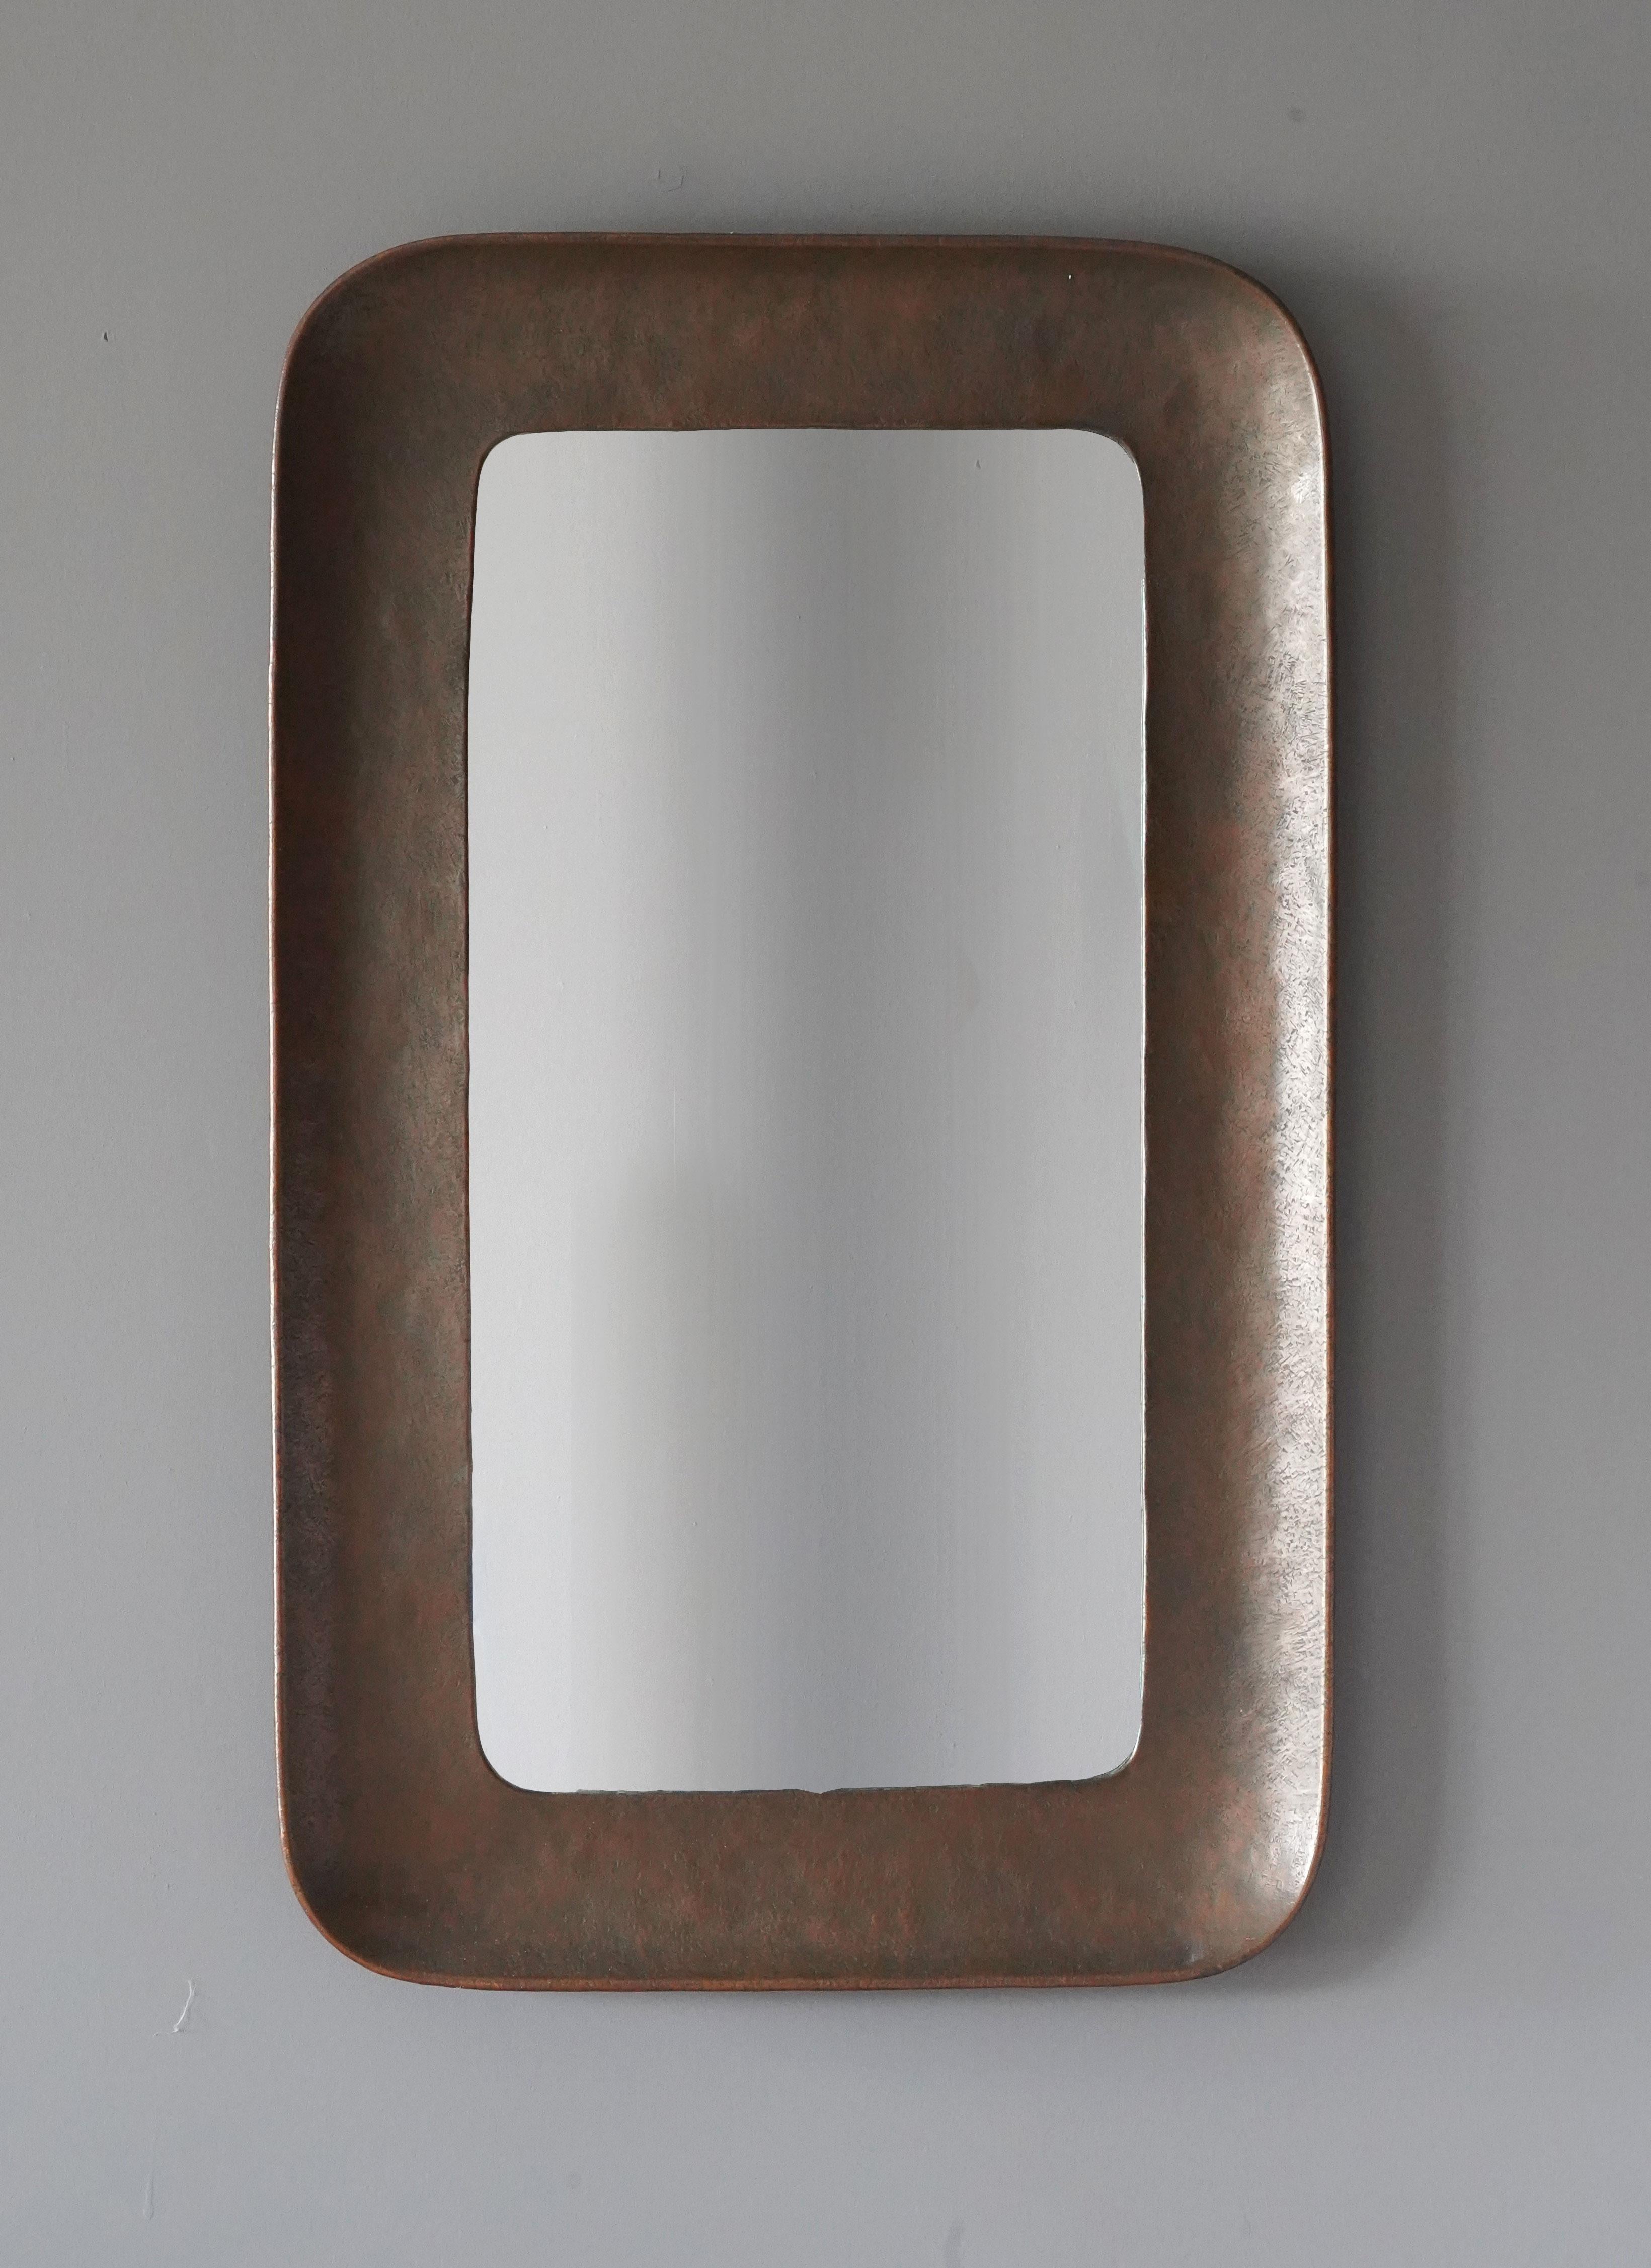 A sizable wall mirror, designed and produced by Angelo Bragalini, Italy, 1950s. In burnished copper, original mirror glass.

Other designers of the period include Fontana Arte, Max Ingrand, Gio Ponti, Seguso, and Franco Albini.